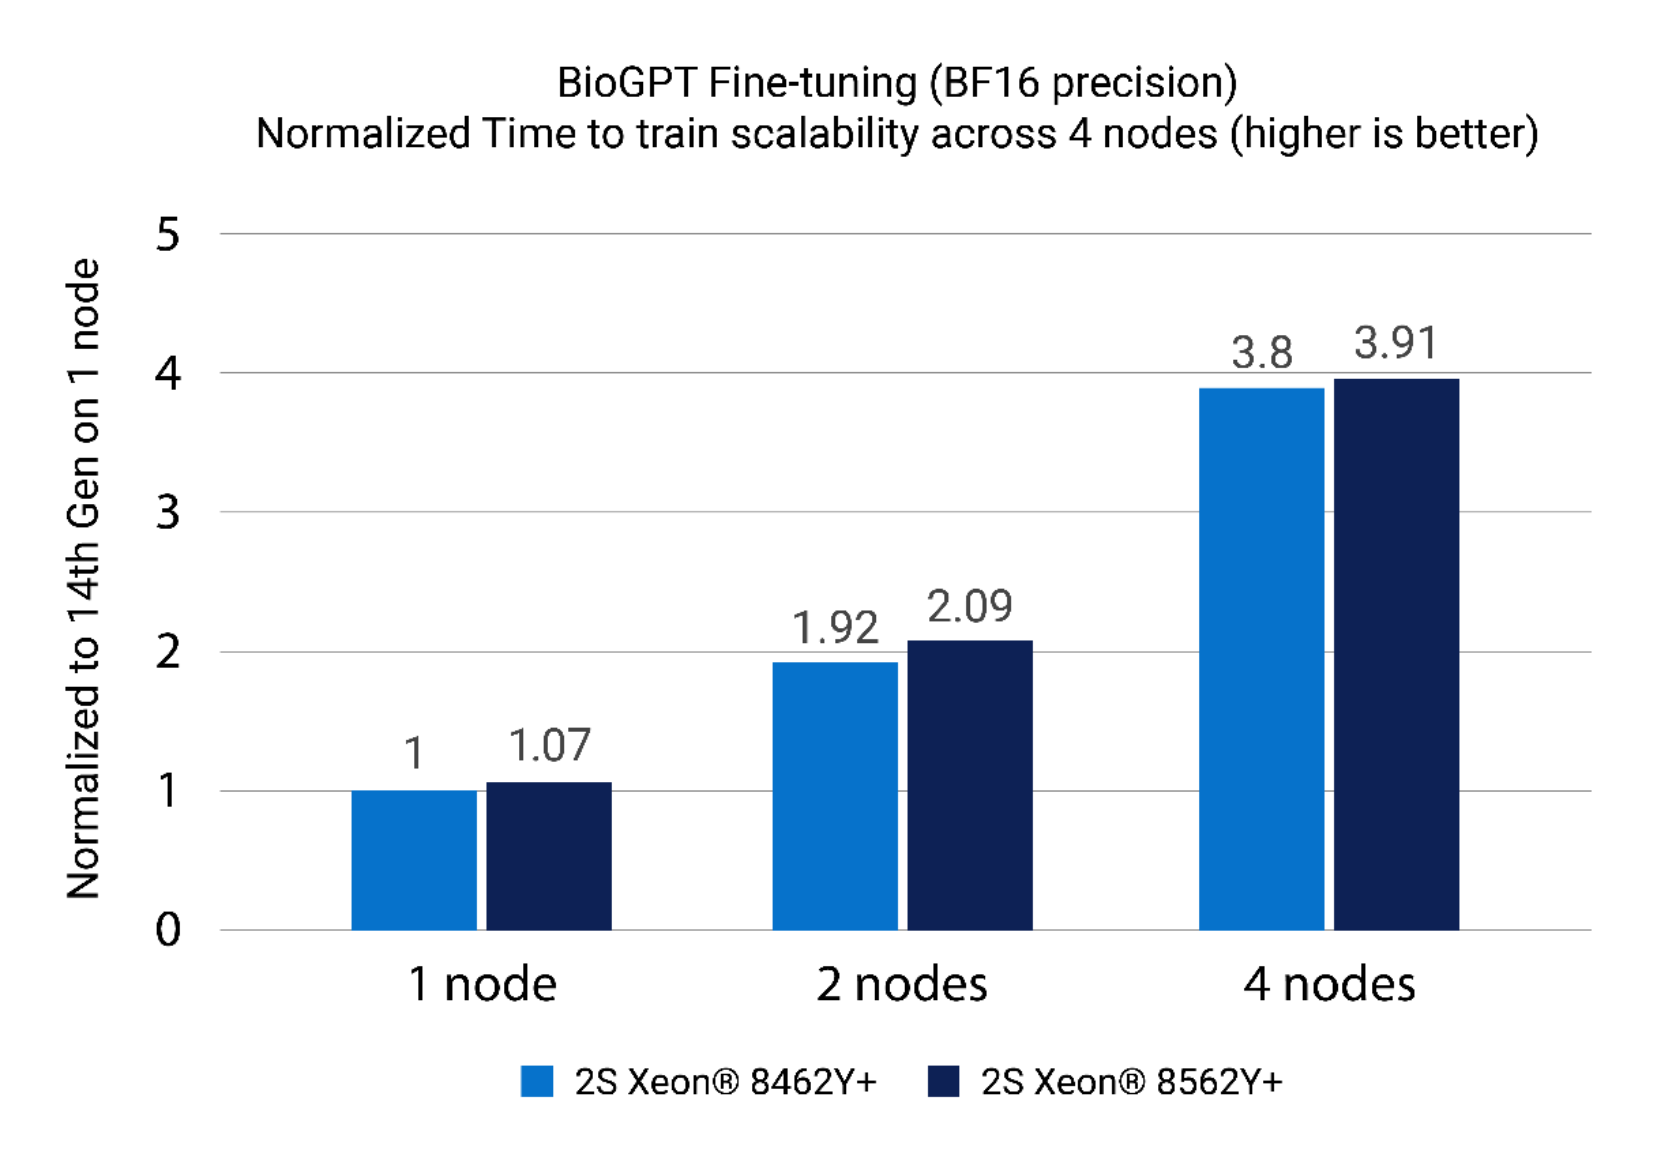 Figure 5: . Bio-GPT fine-tuning scalability across 1,2,4 nodesGraph showing Normalized Time to train. 